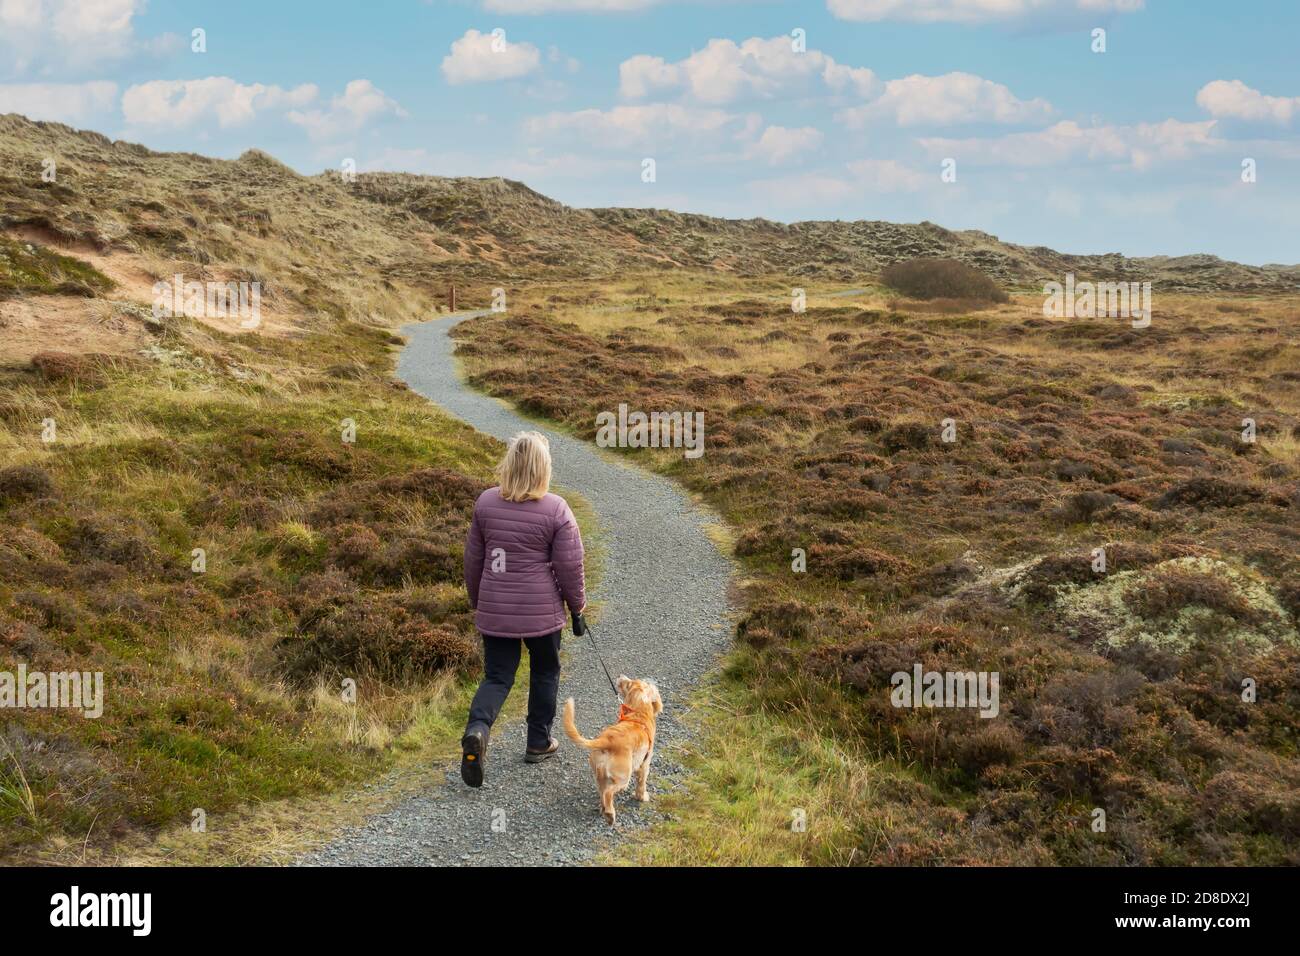 A dog walker on the path in the Forvie Sands National Nature Reserve near Collieston, Aberdeenshire, Scotland, UK Stock Photo